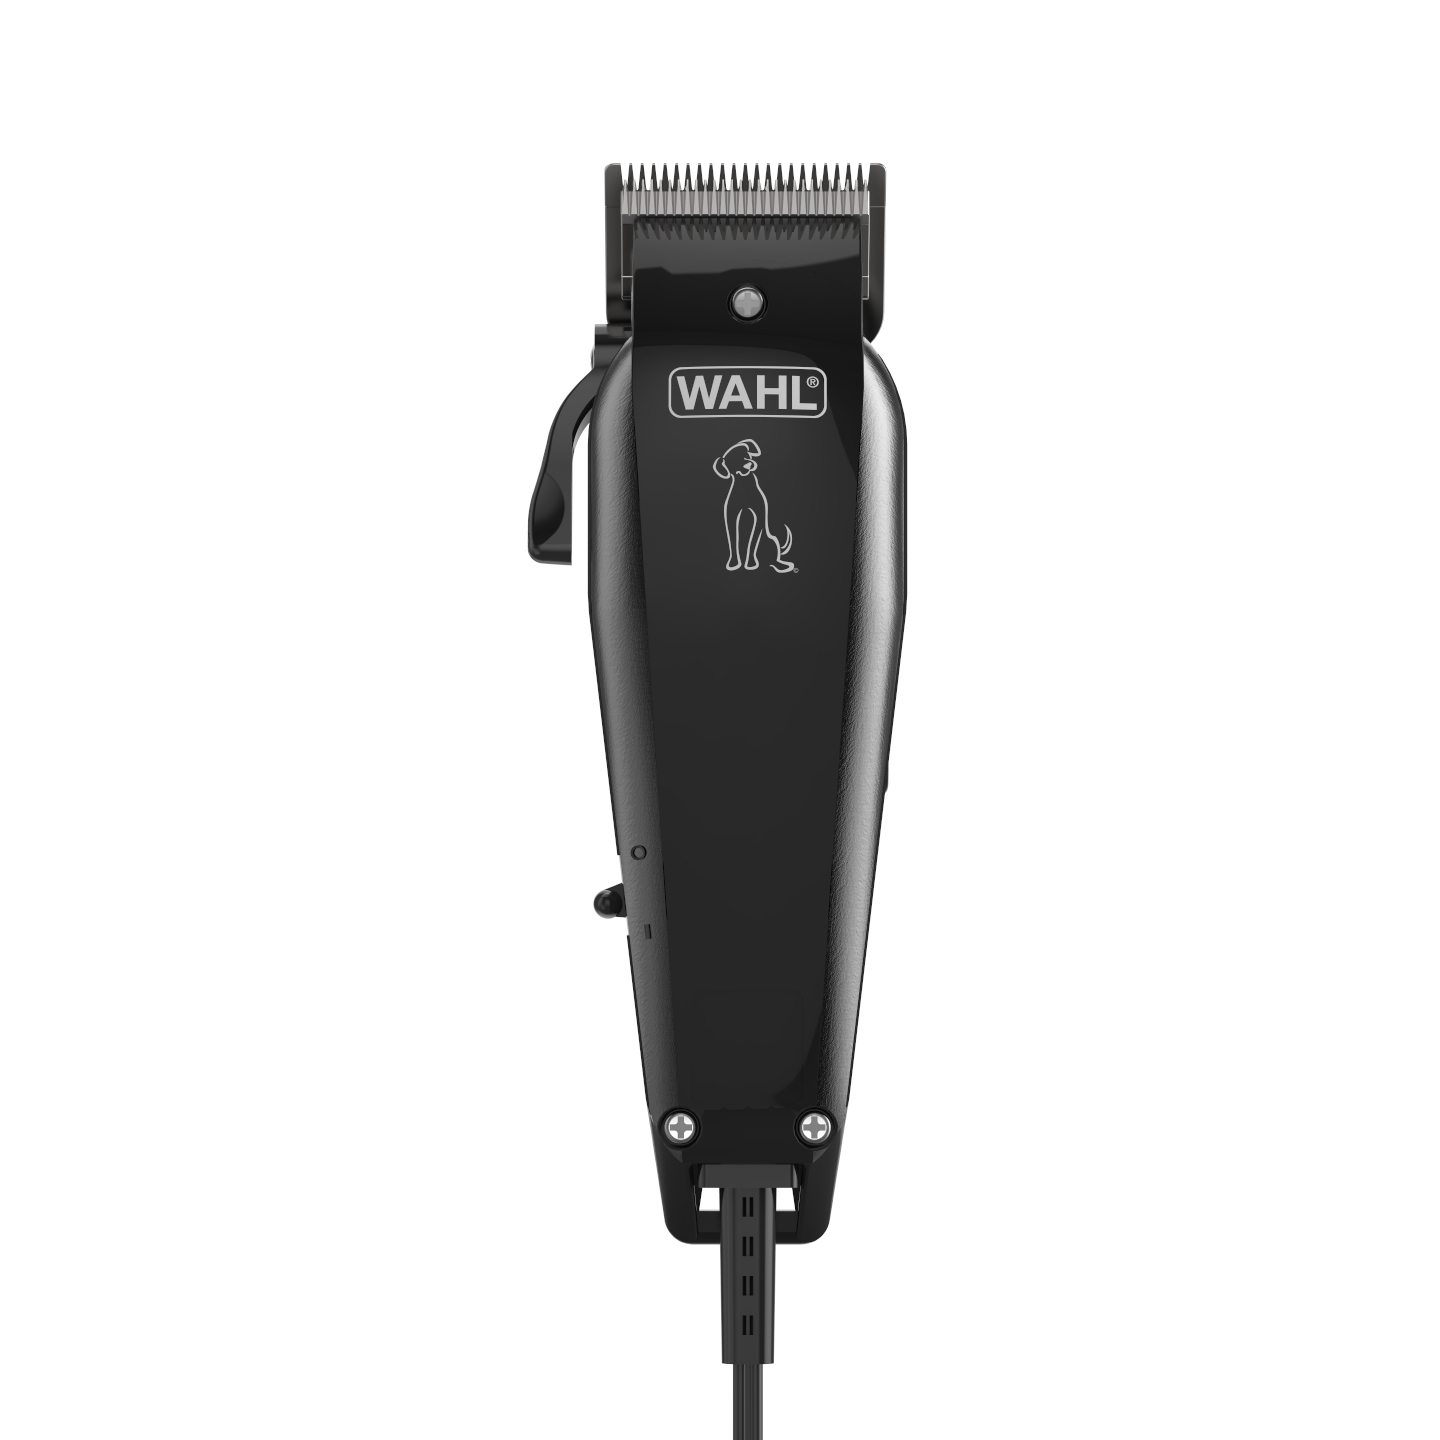 wahl dog clippers not cutting